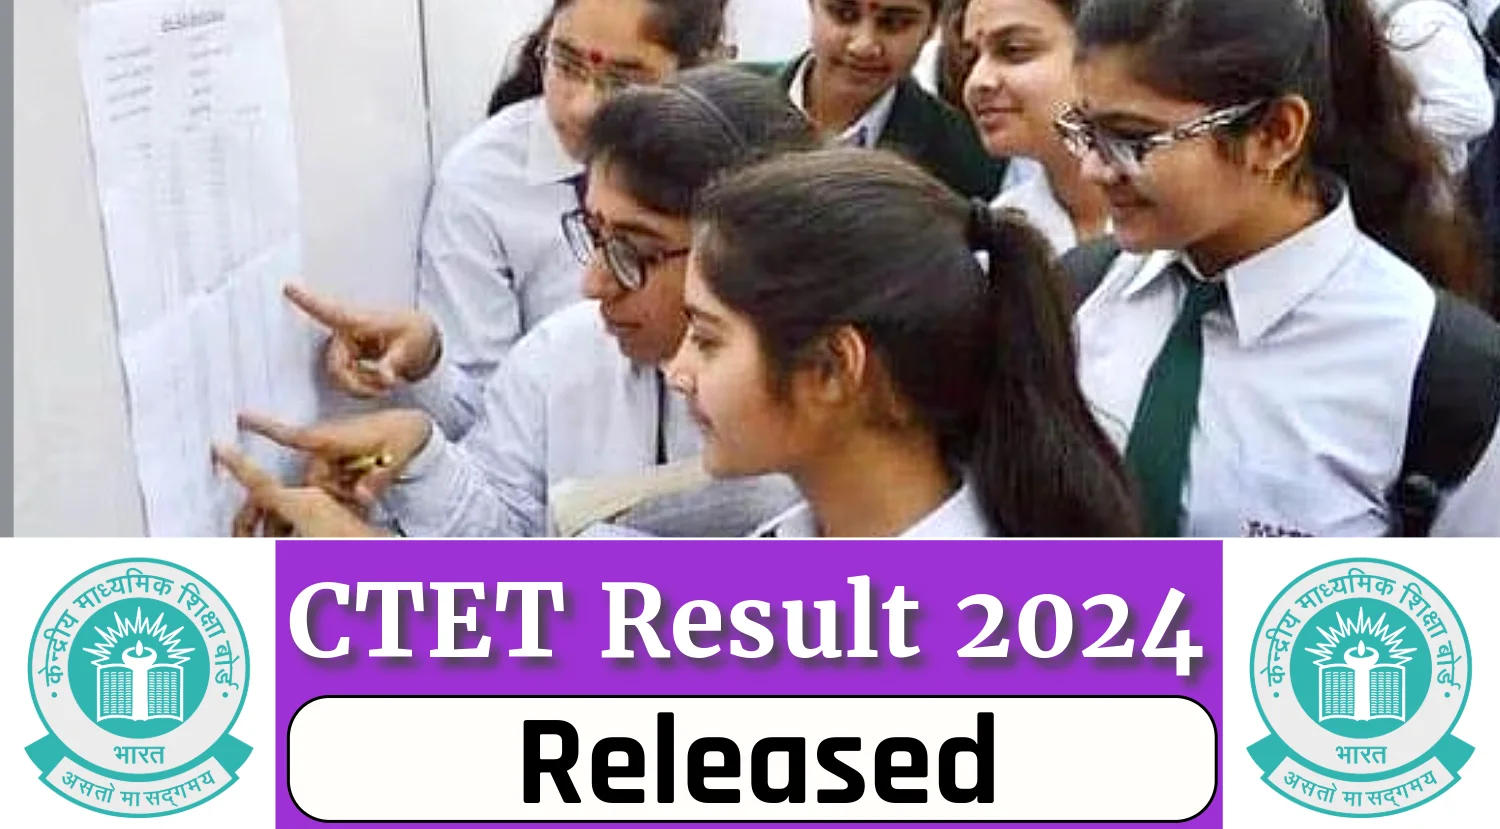 CTET Result 2024 Out Now